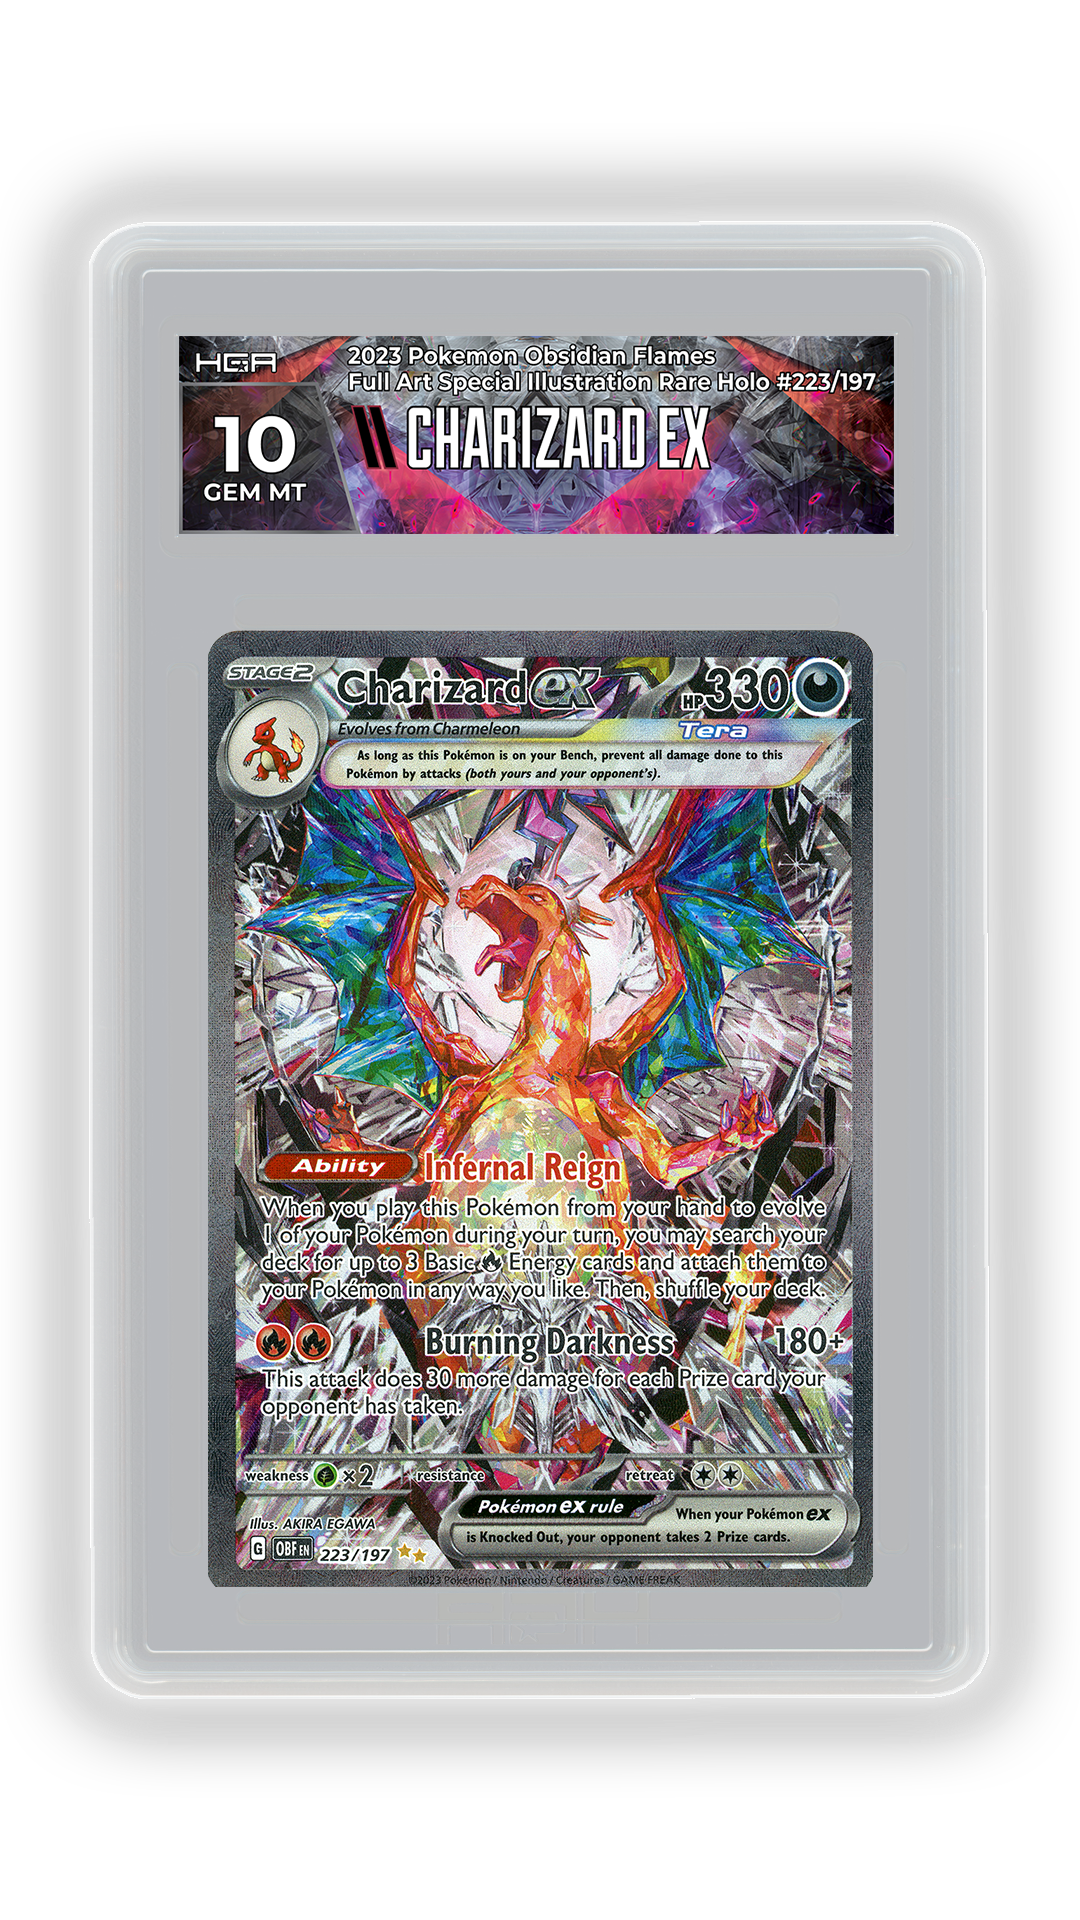 Our Unique Label Designs Enhance Your Yu-Gi-Oh! Cards